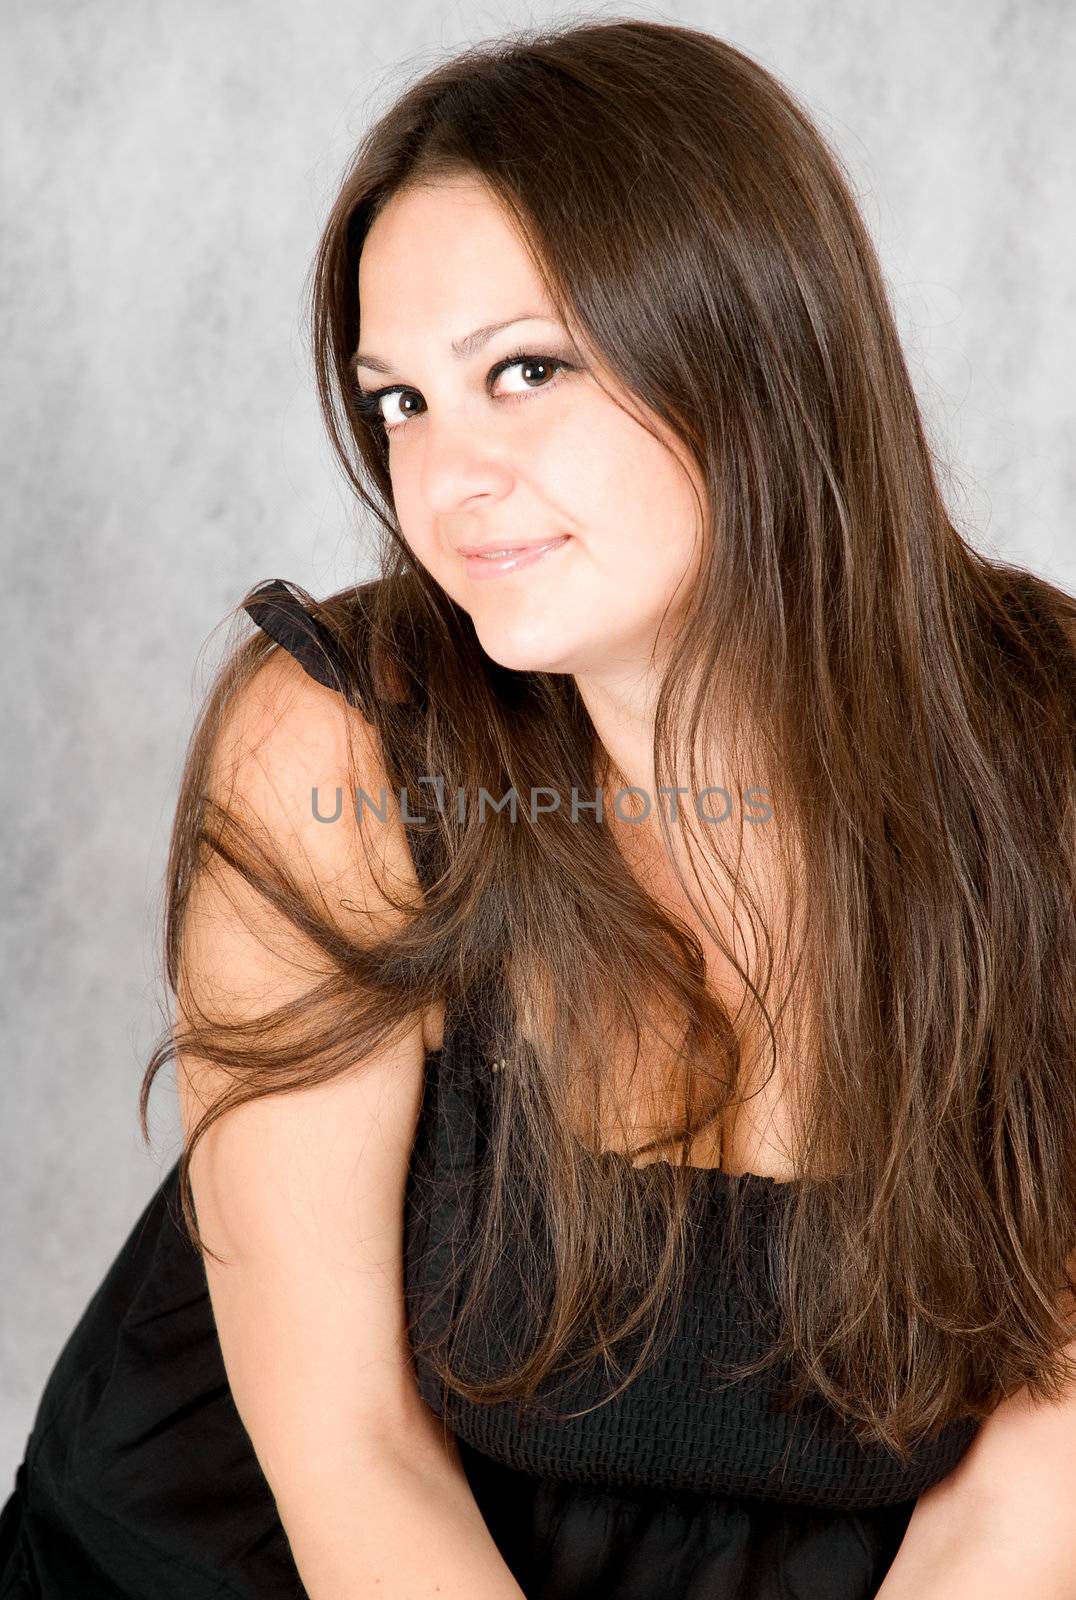 smiling young woman with long brown hair by petr_malyshev